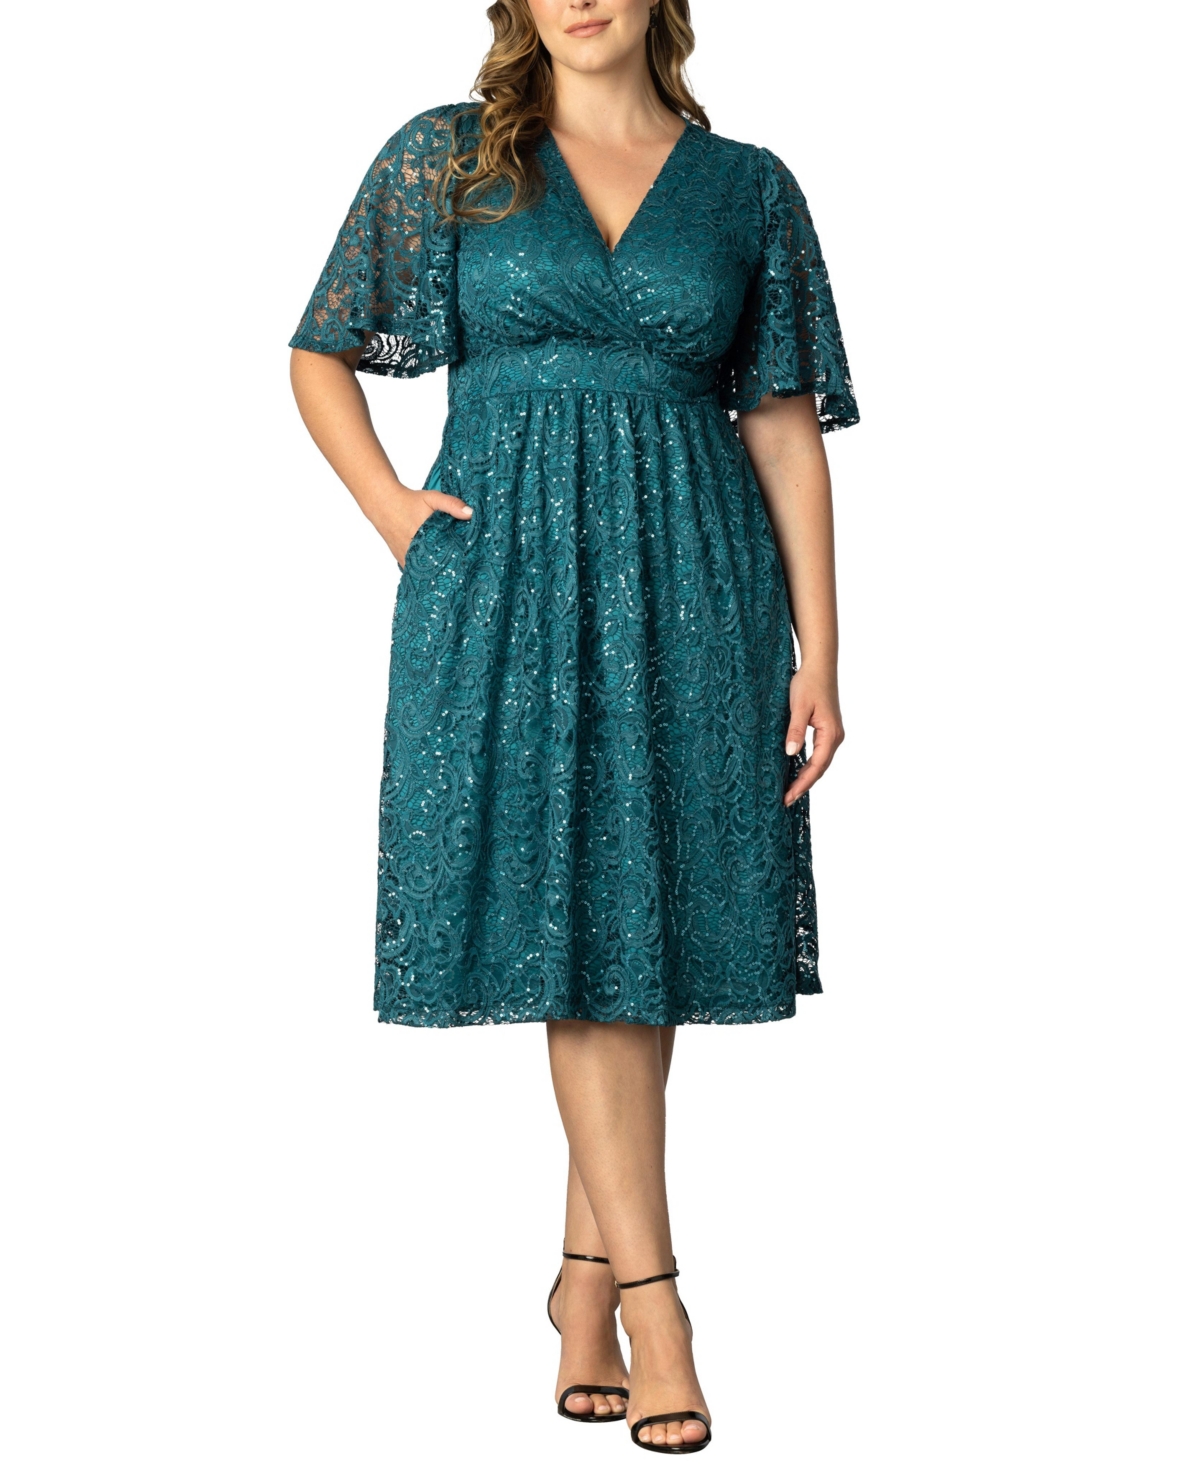 KIYONNA WOMEN'S PLUS SIZE STARRY SEQUINED LACE COCKTAIL DRESS